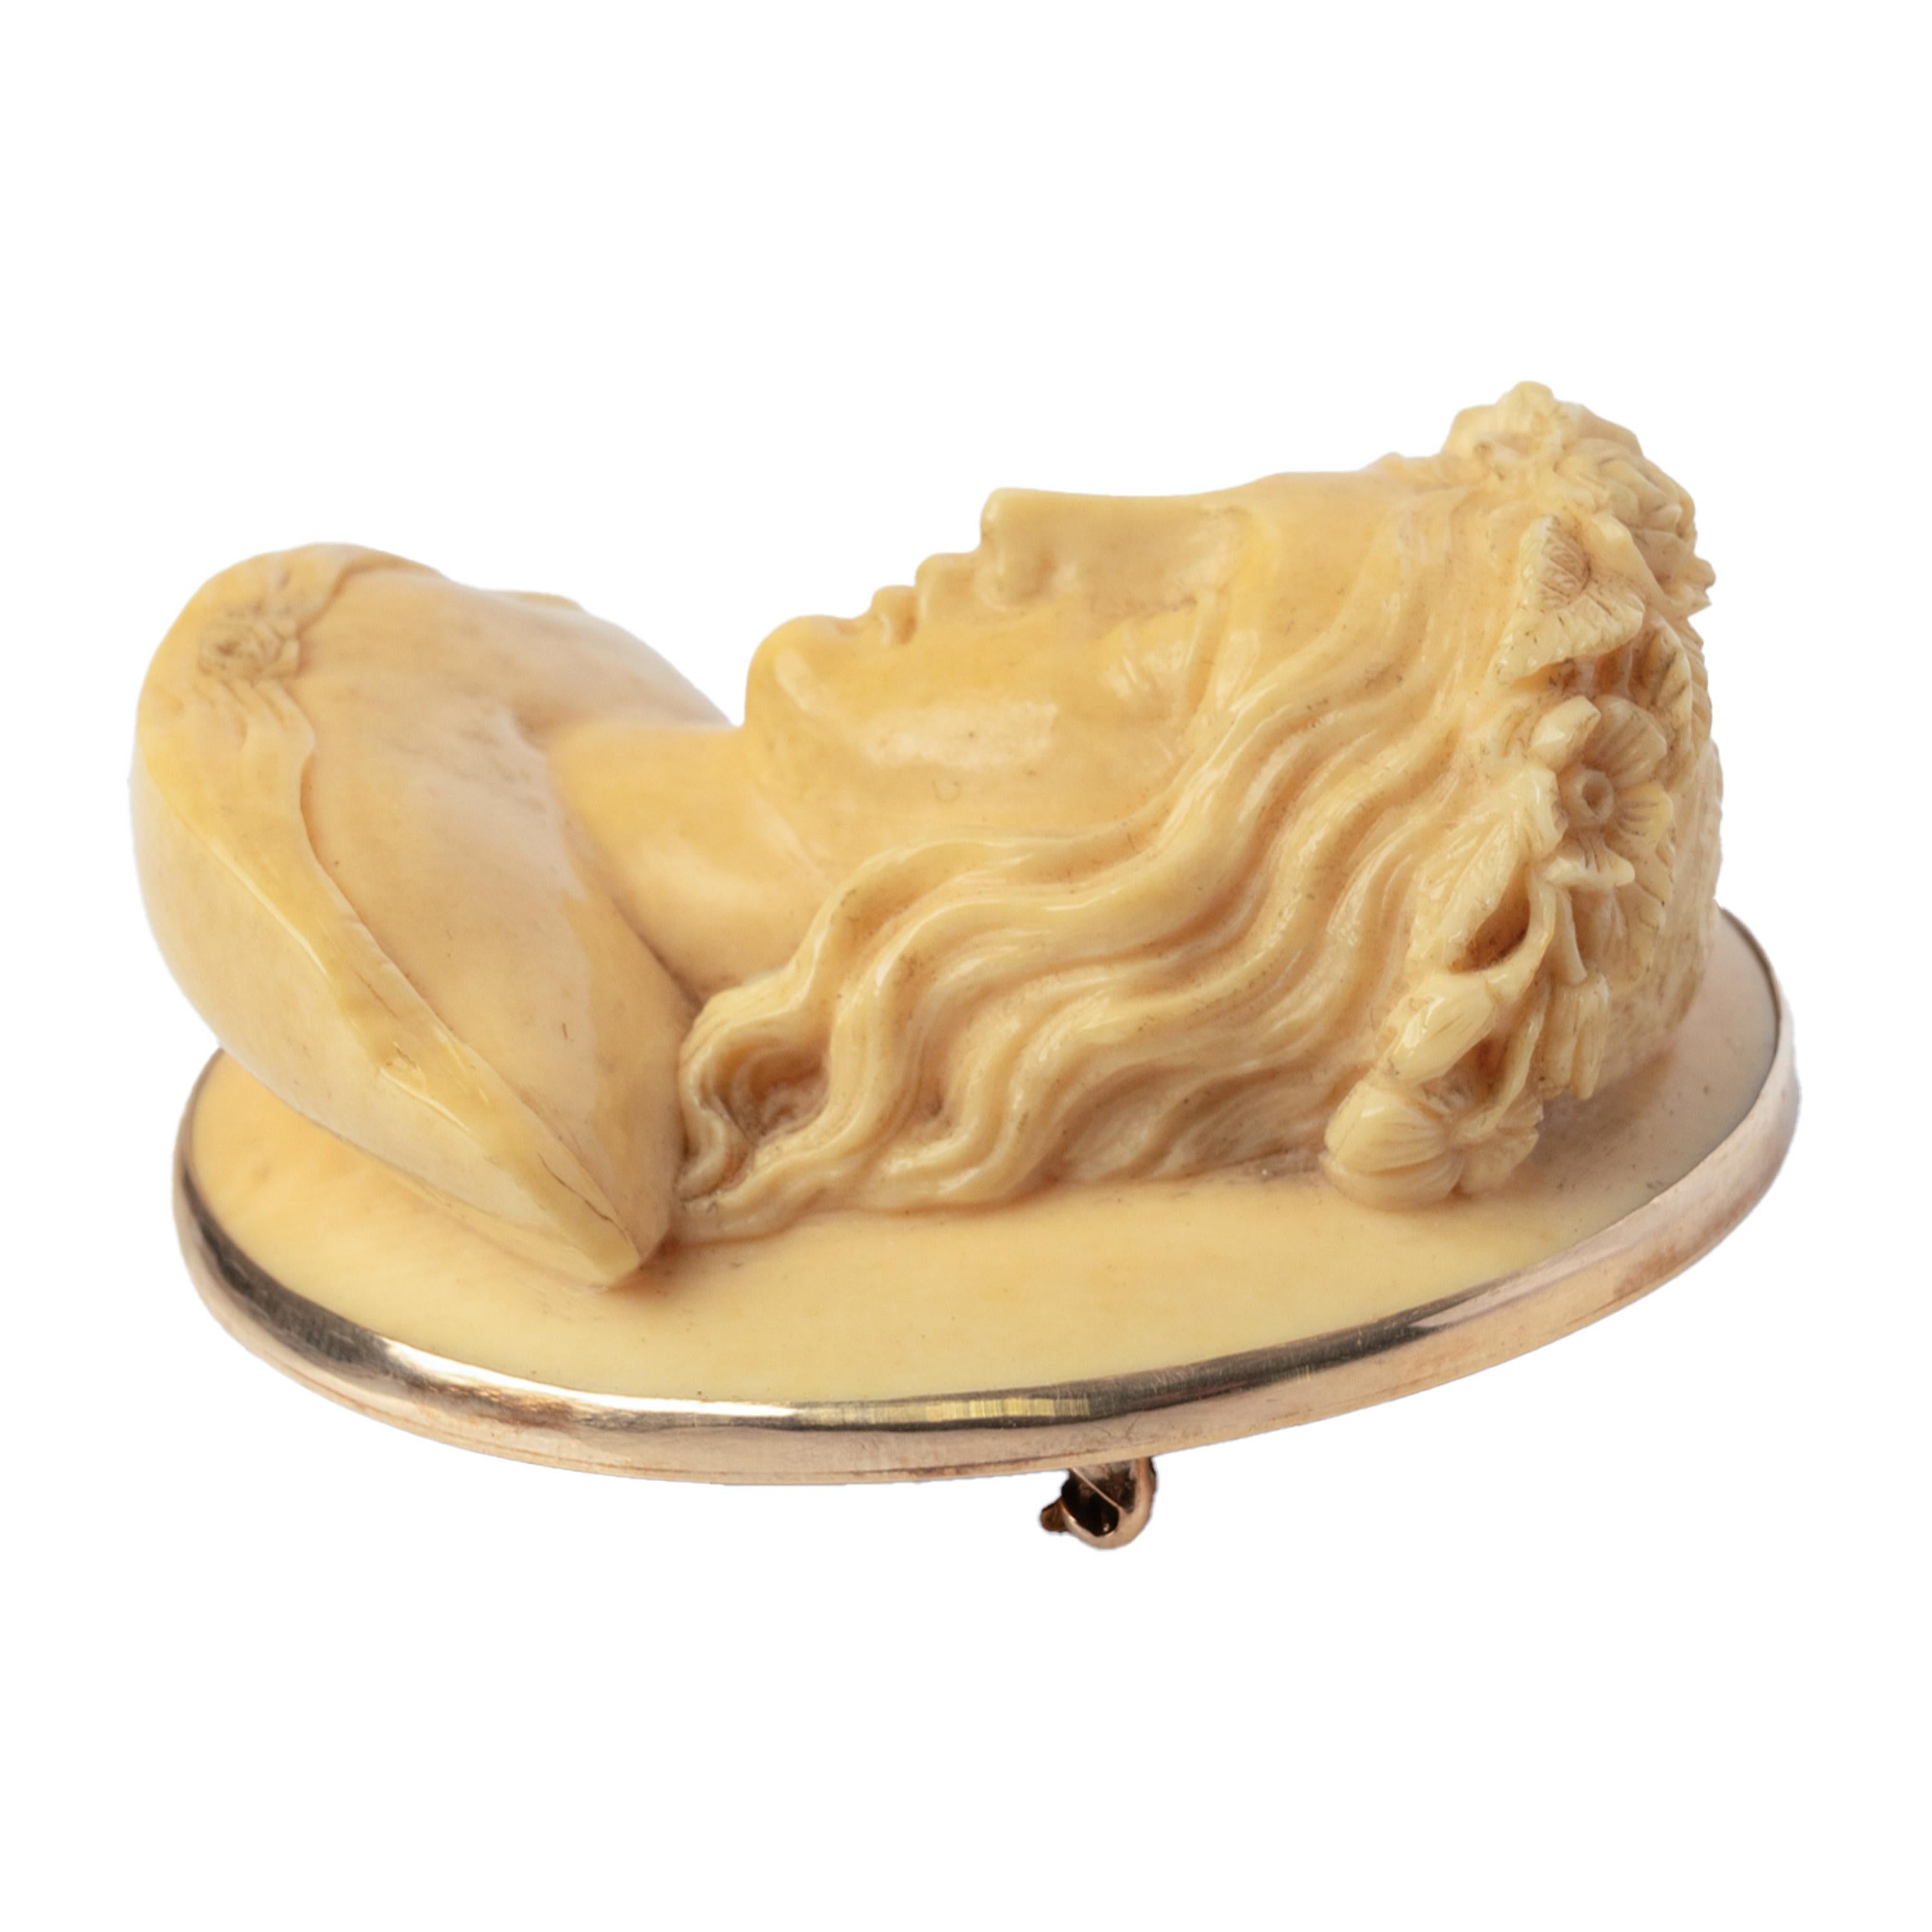 Carved Antique 19th Century Ivory 14 k Gold Pre-Raphaelite Cameo Brooch Pendant 1870 For Sale